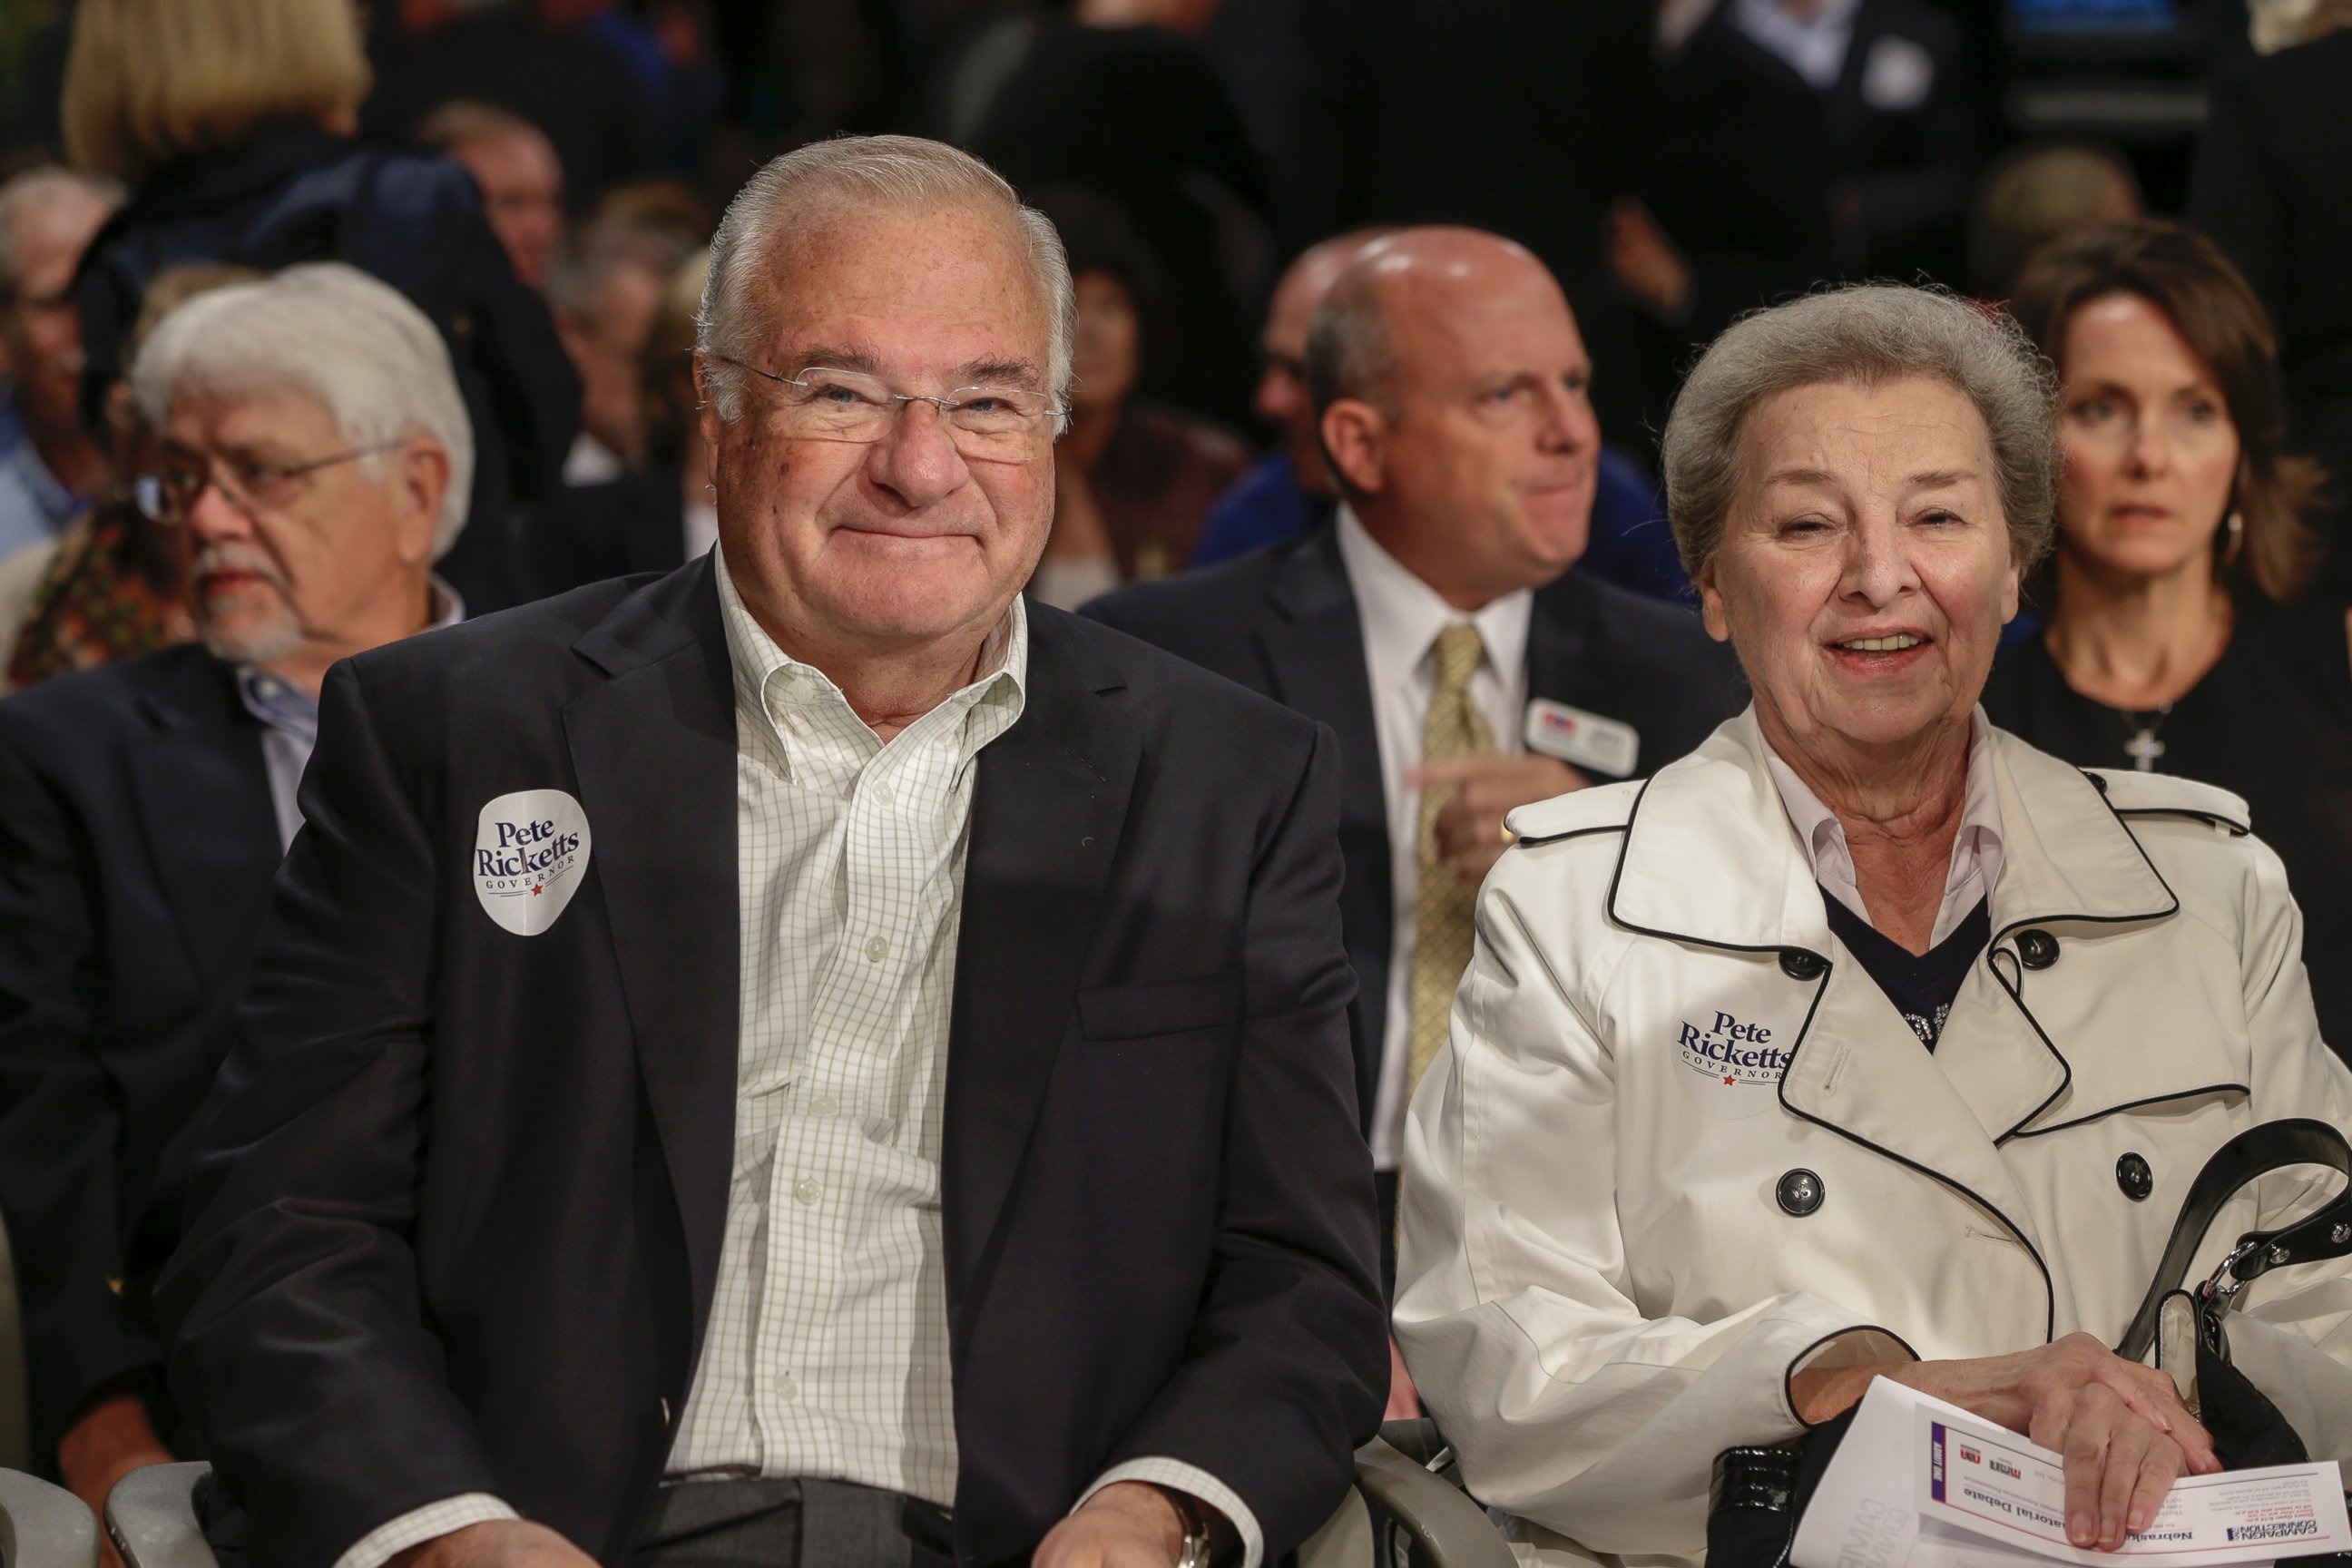 PHOTO: Joe and Marlene Ricketts, parents of Republican gubernatorial candidate Pete Ricketts, are seen prior to a debate in Lincoln, Nebraska, Oct. 2, 2014.